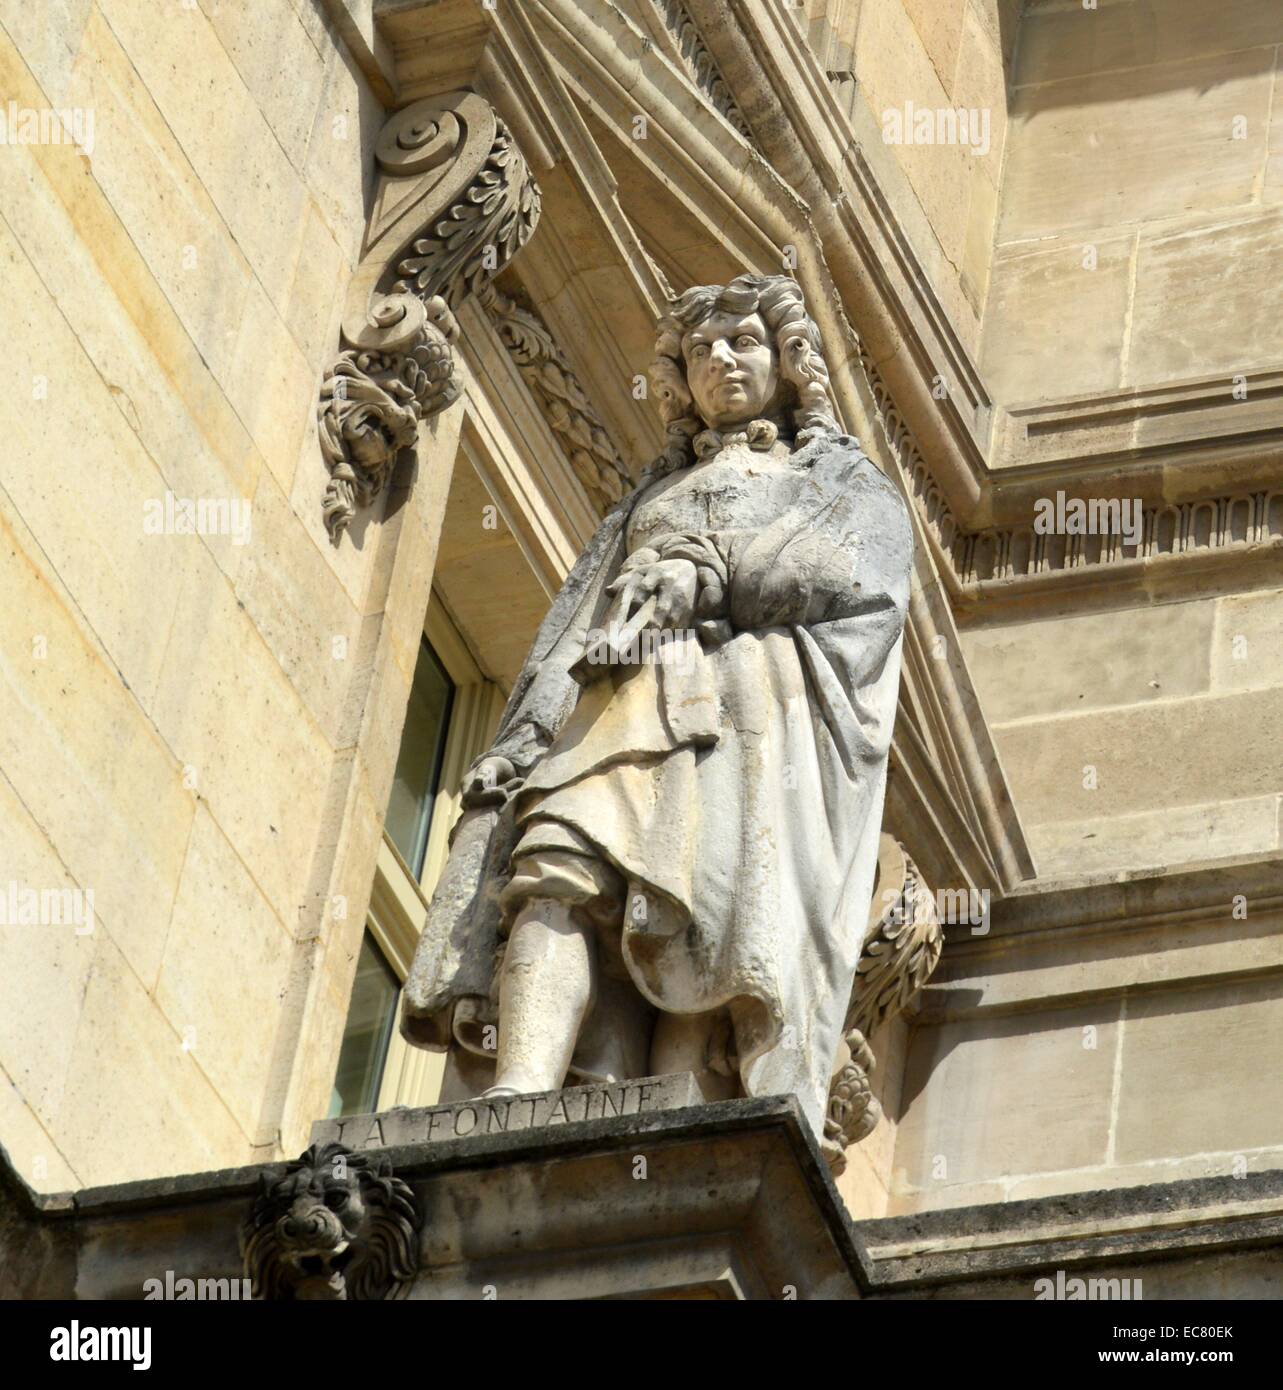 Jean de La Fontaine (1621-1695) was the most famous French fabulist and one of the most widely read French poets. Dated 17th century. Stock Photo